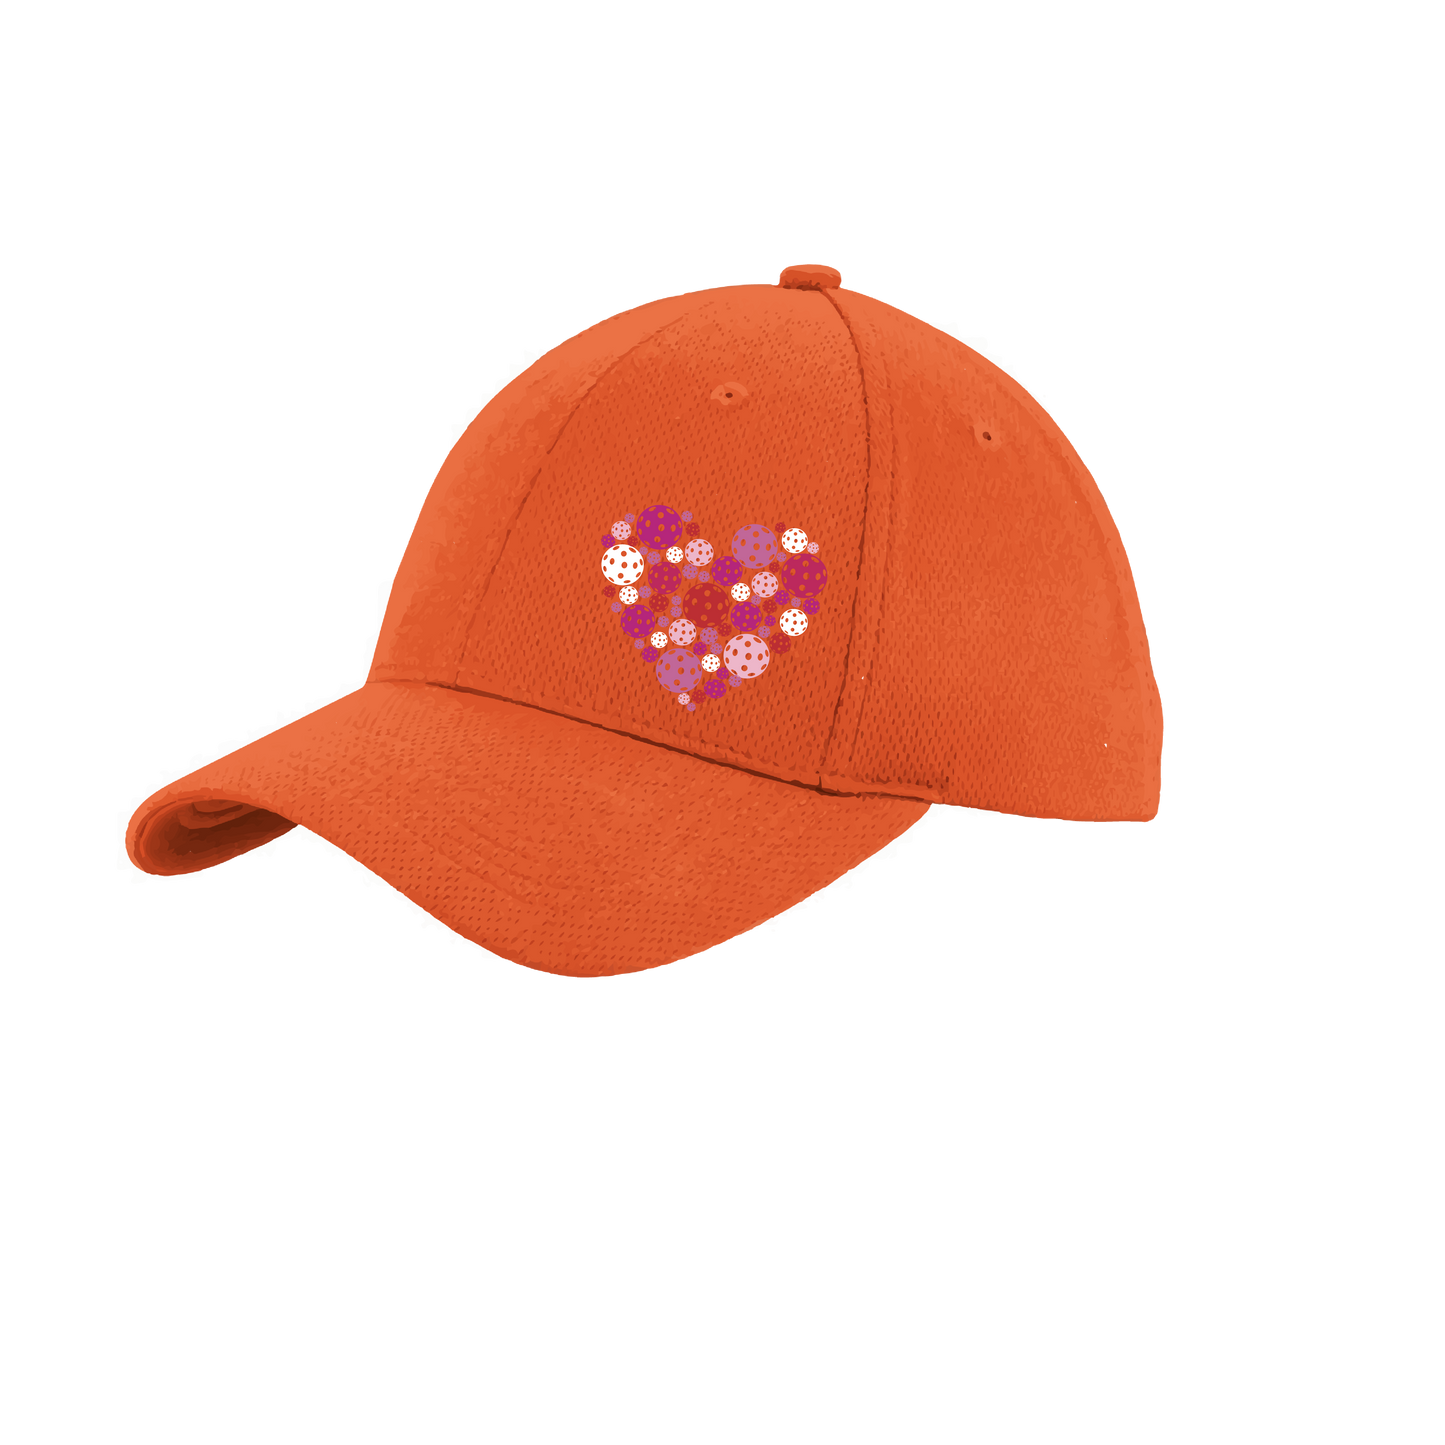 This polyester pickleball hat features PosiCharge Technology, and is ideal for active pickleball players to help them stay focused on the game. It features a breathable, moisture-wicking material with closed-hole flat back mesh, and adjustable back closure for adult sizes. Stay cool, comfortable, and stylish with this pickleball hat.